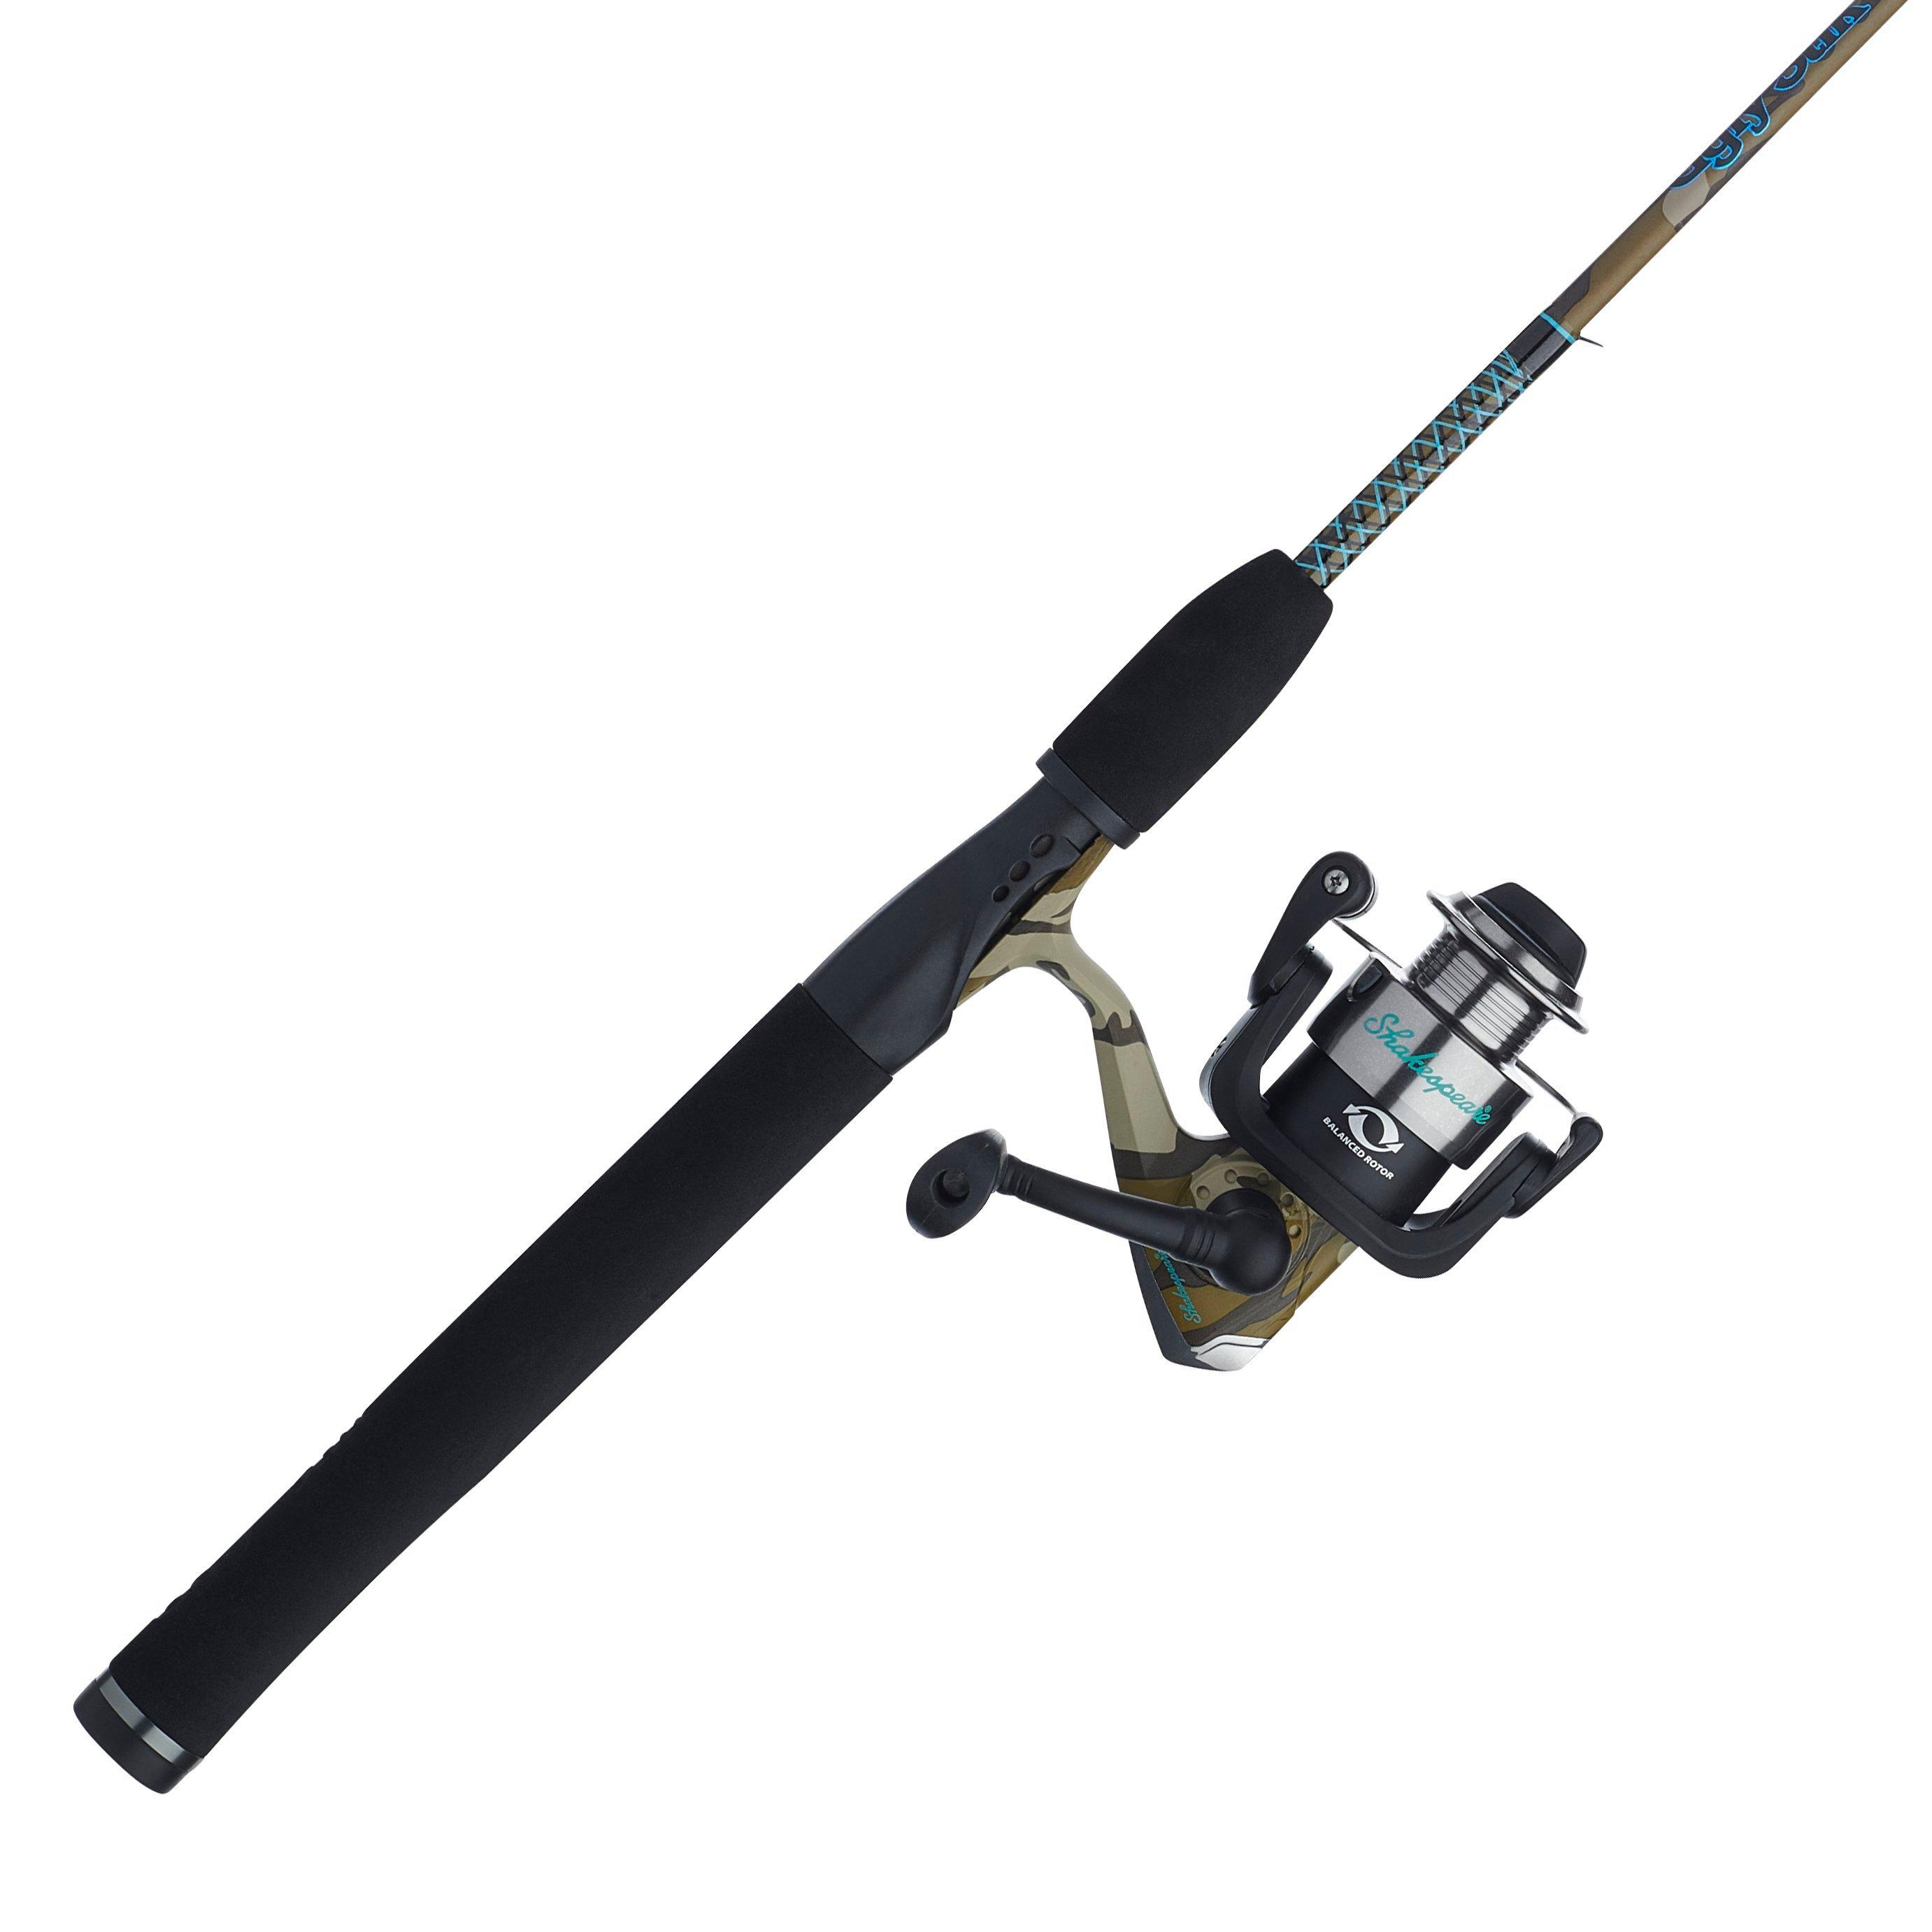 https://op1.0ps.us/original/opplanet-ugly-stik-lady-camo-spinning-combo-5-0-1-right-left-30-6ft-rod-length-medium-power-2-pieces-rod-uslcamosp602m-30cbo-main